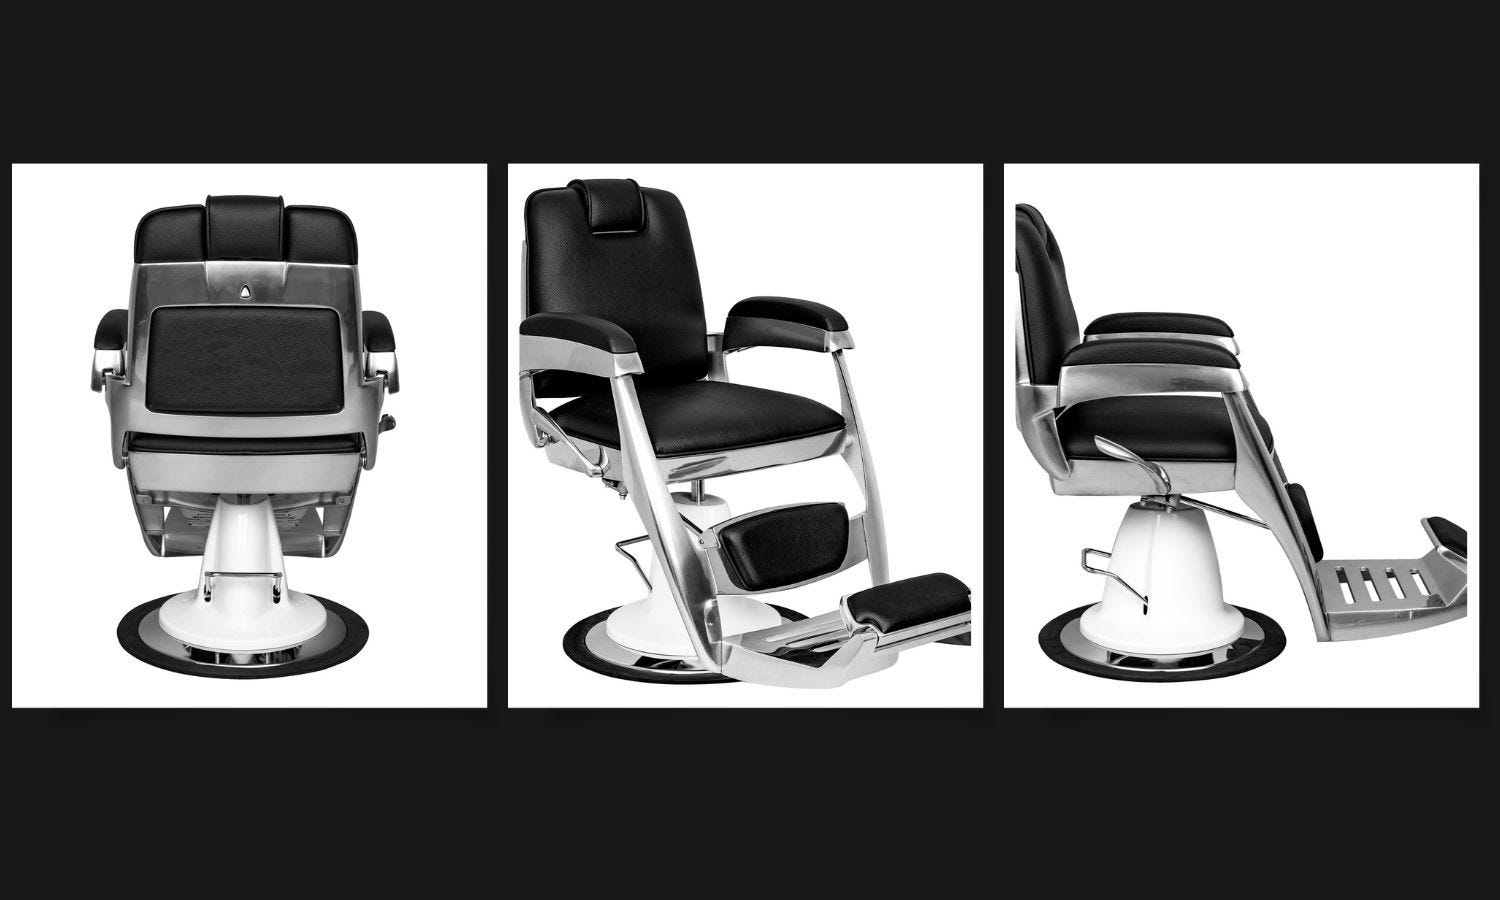 front, back and side views of a modern barber chair in black and chrome